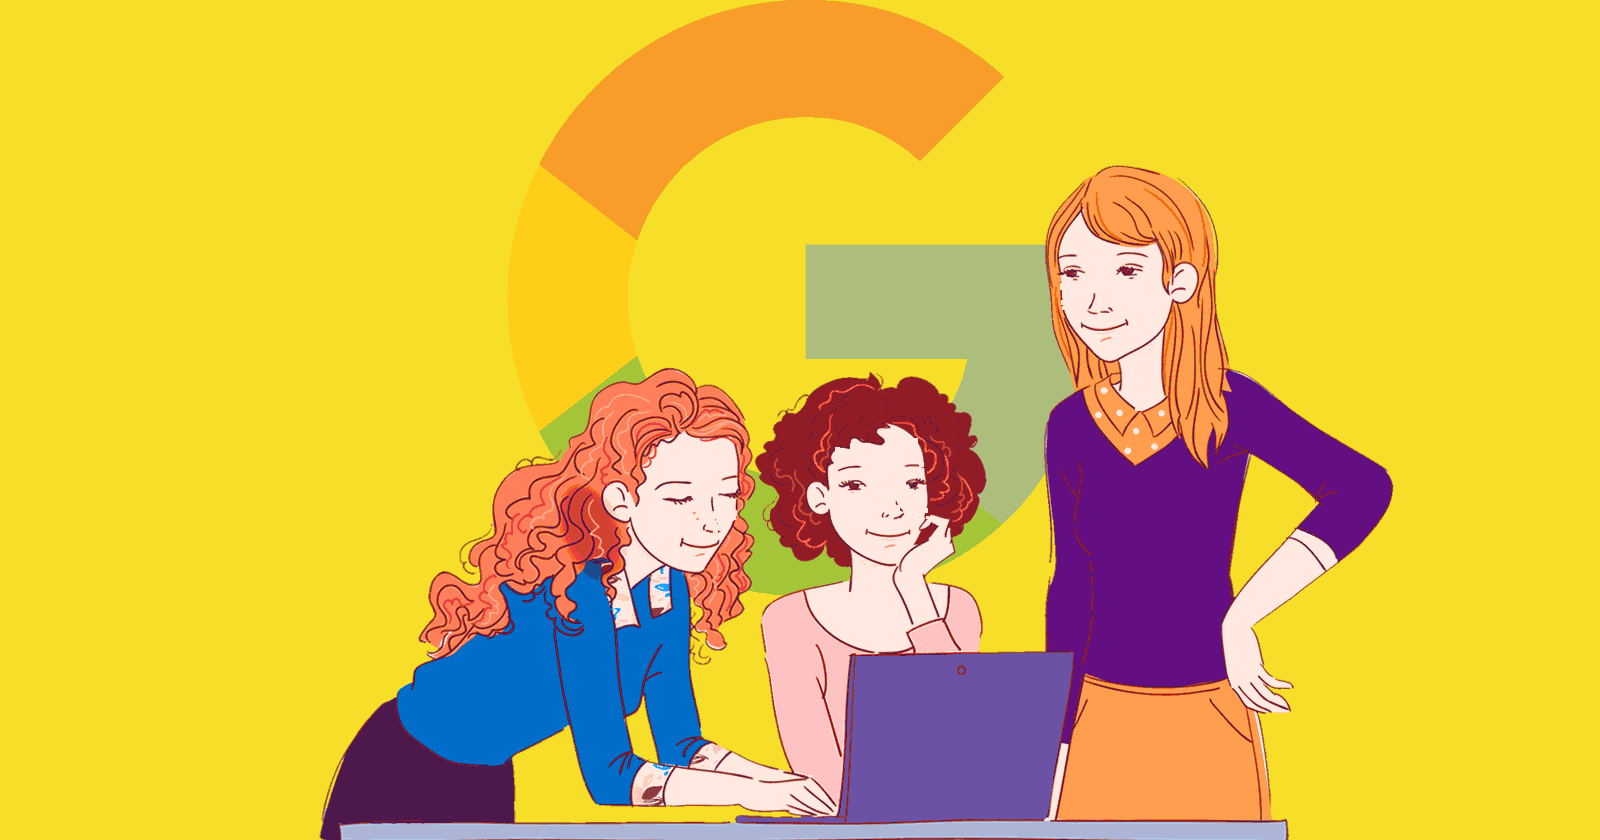 Image of three young women looking at a laptop and Google's logo behind them.